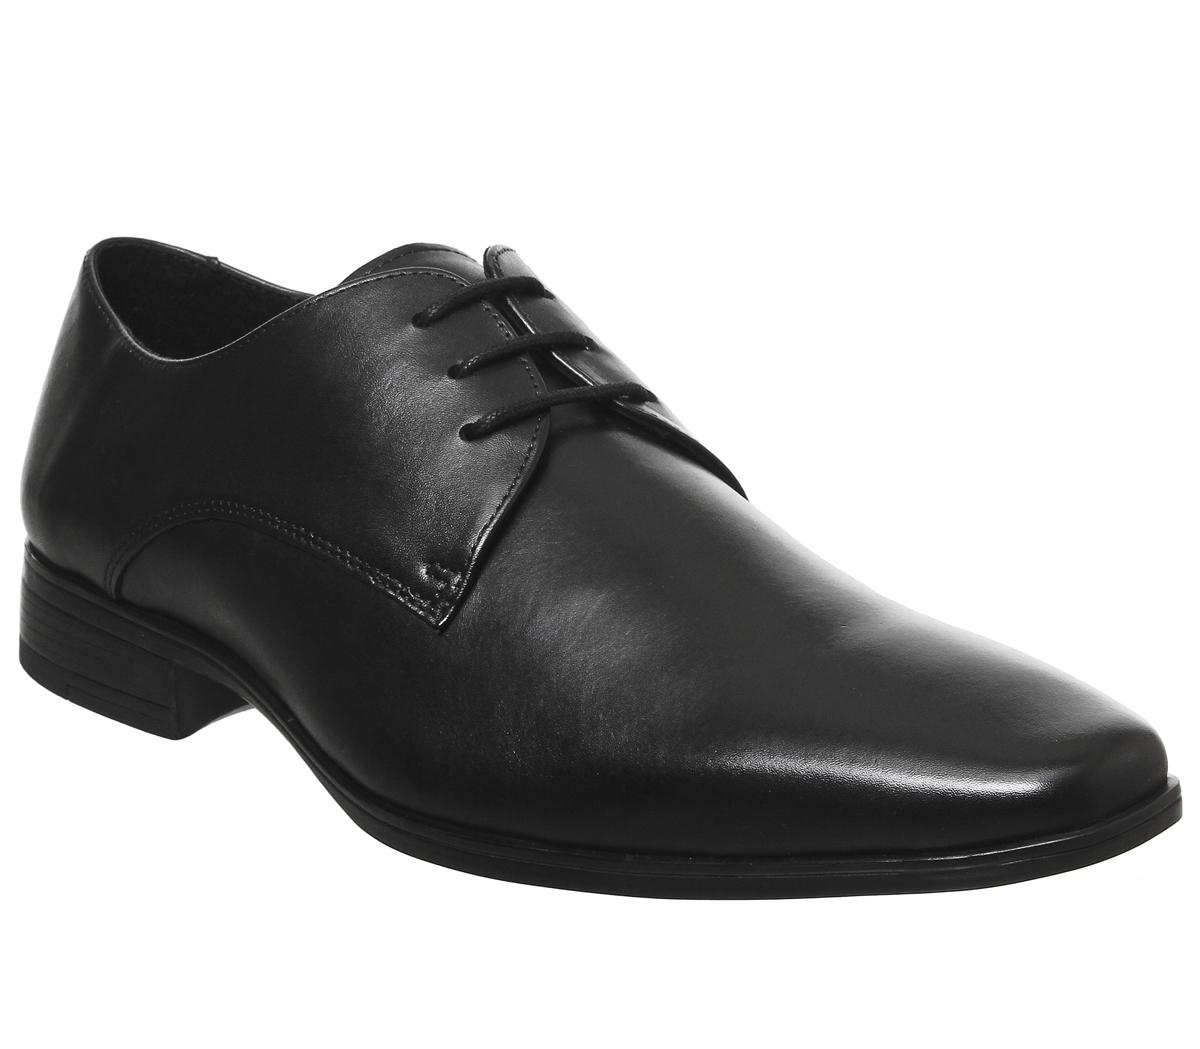 OFFICEMicro Derby Smart ShoesBlack Leather